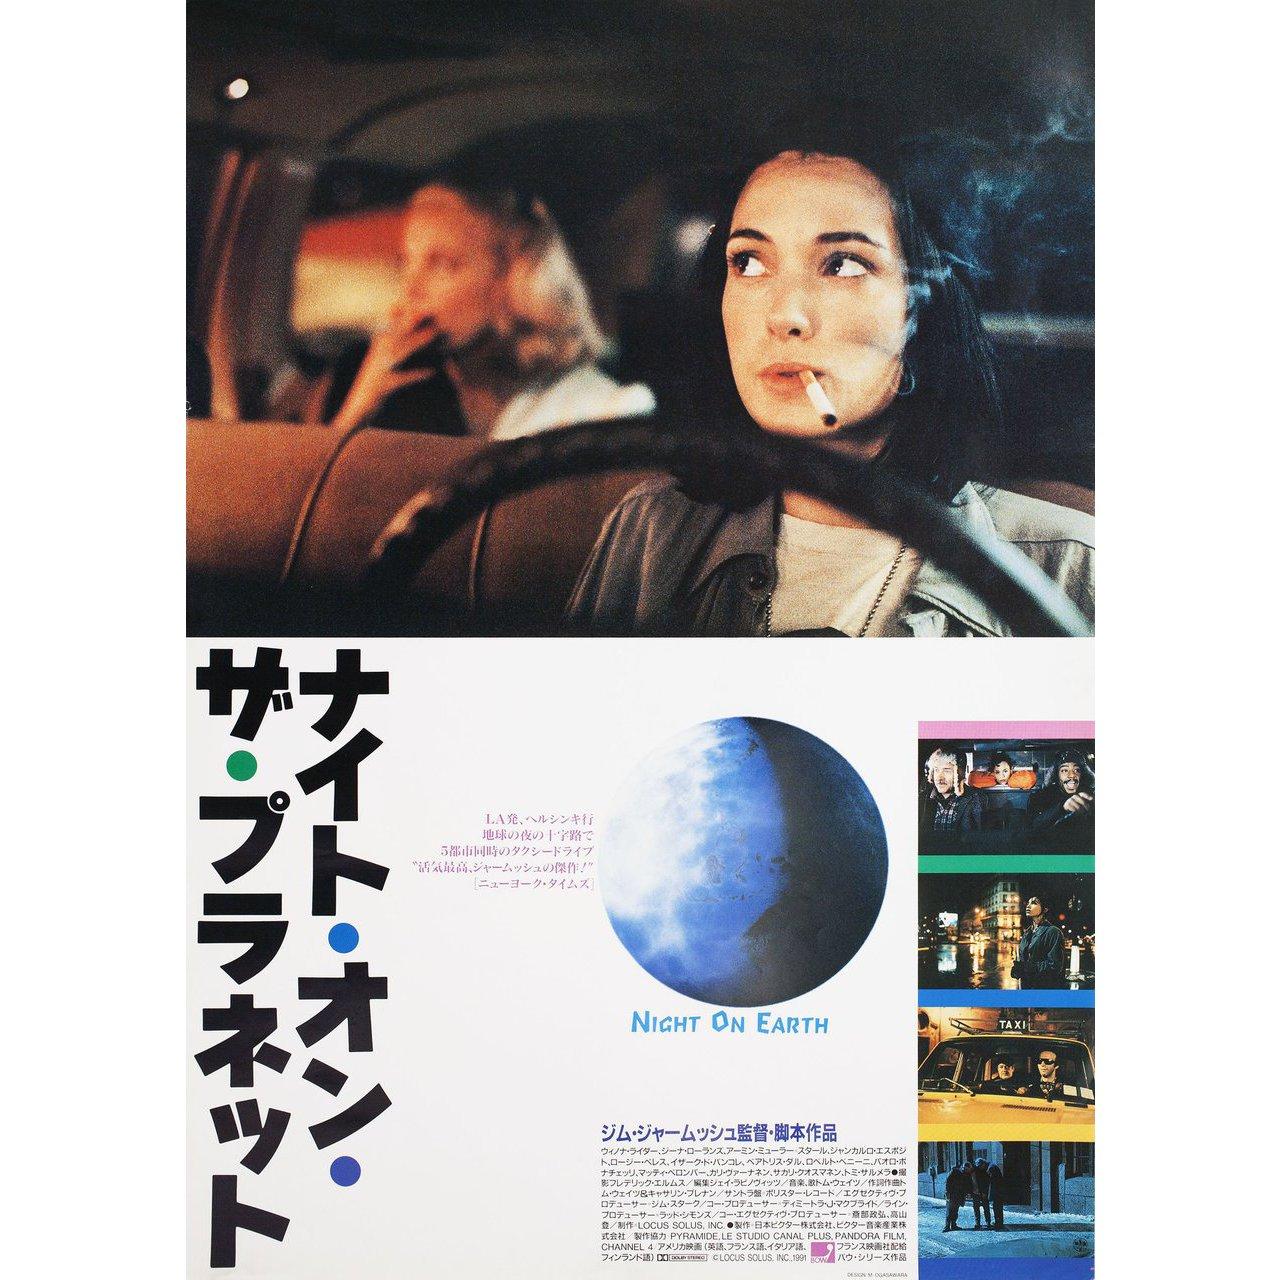 night on earth poster